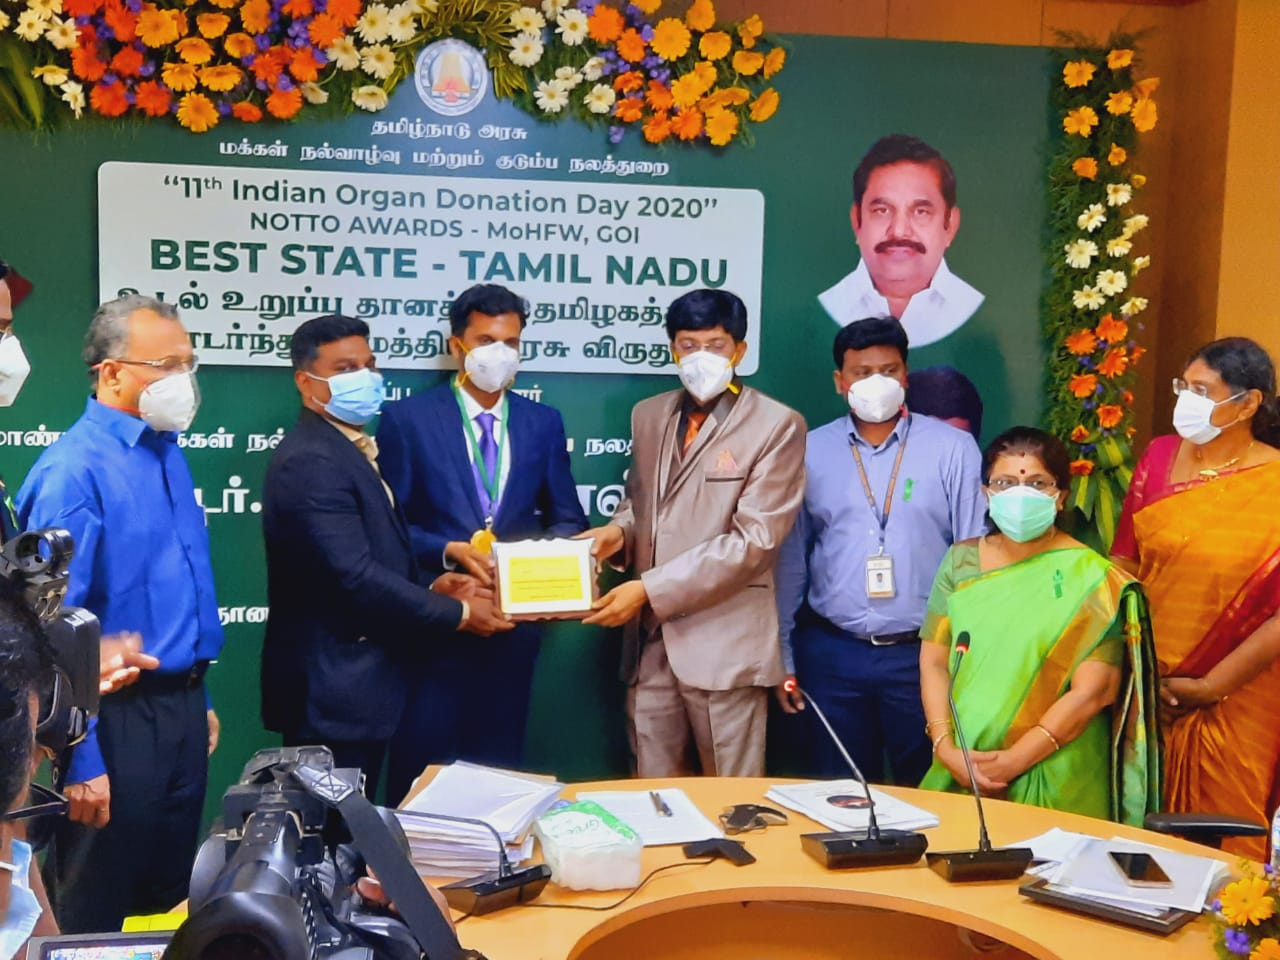 RIMC awarded the Best Performing Live Liver Transplant Team by TRANSTAN